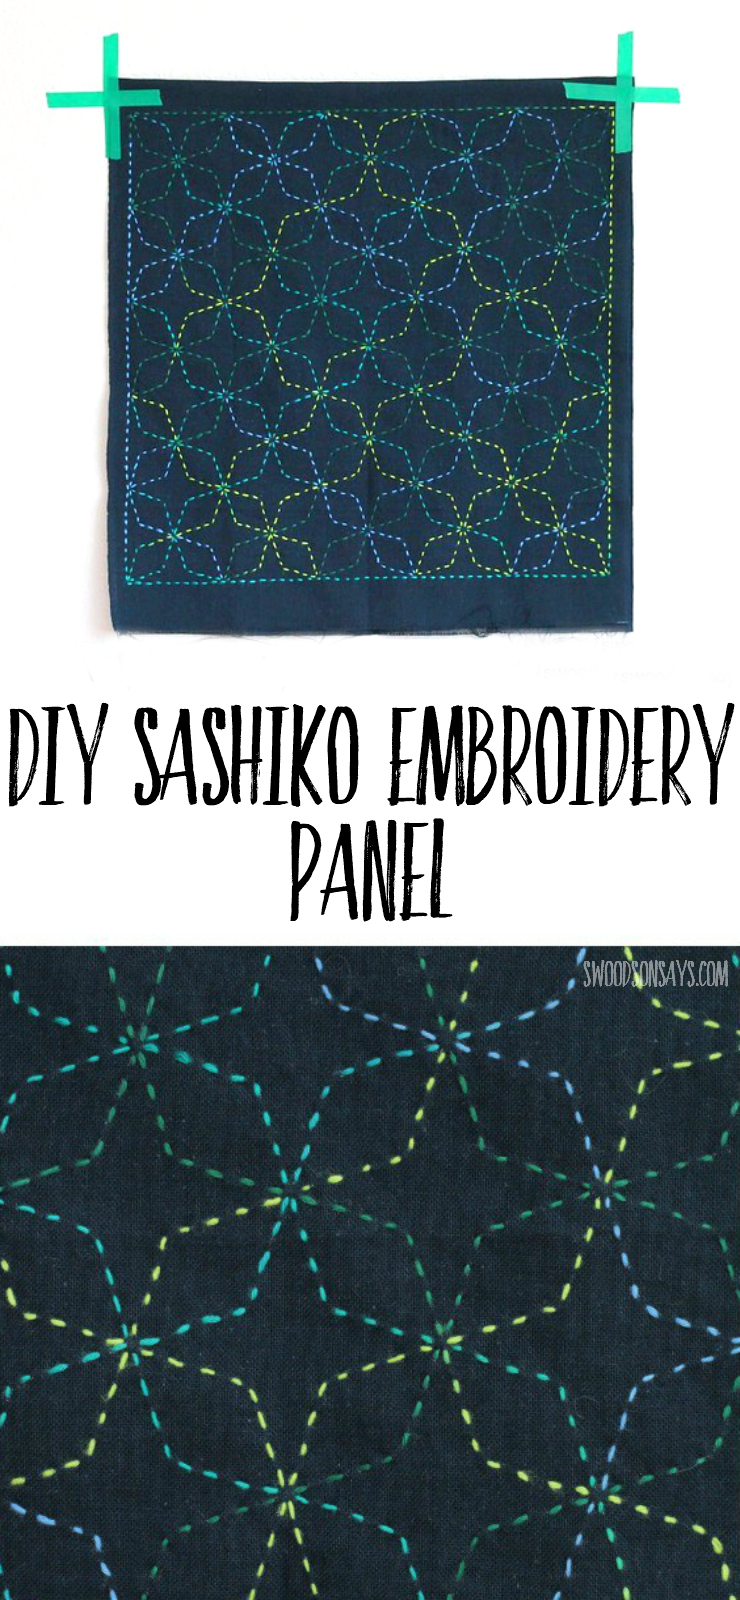 Looking for an embroidery project for beginners? Sashiko is a really simple, fun way to stitch and this shows a preprinted panel that was stitched up sashiko style.